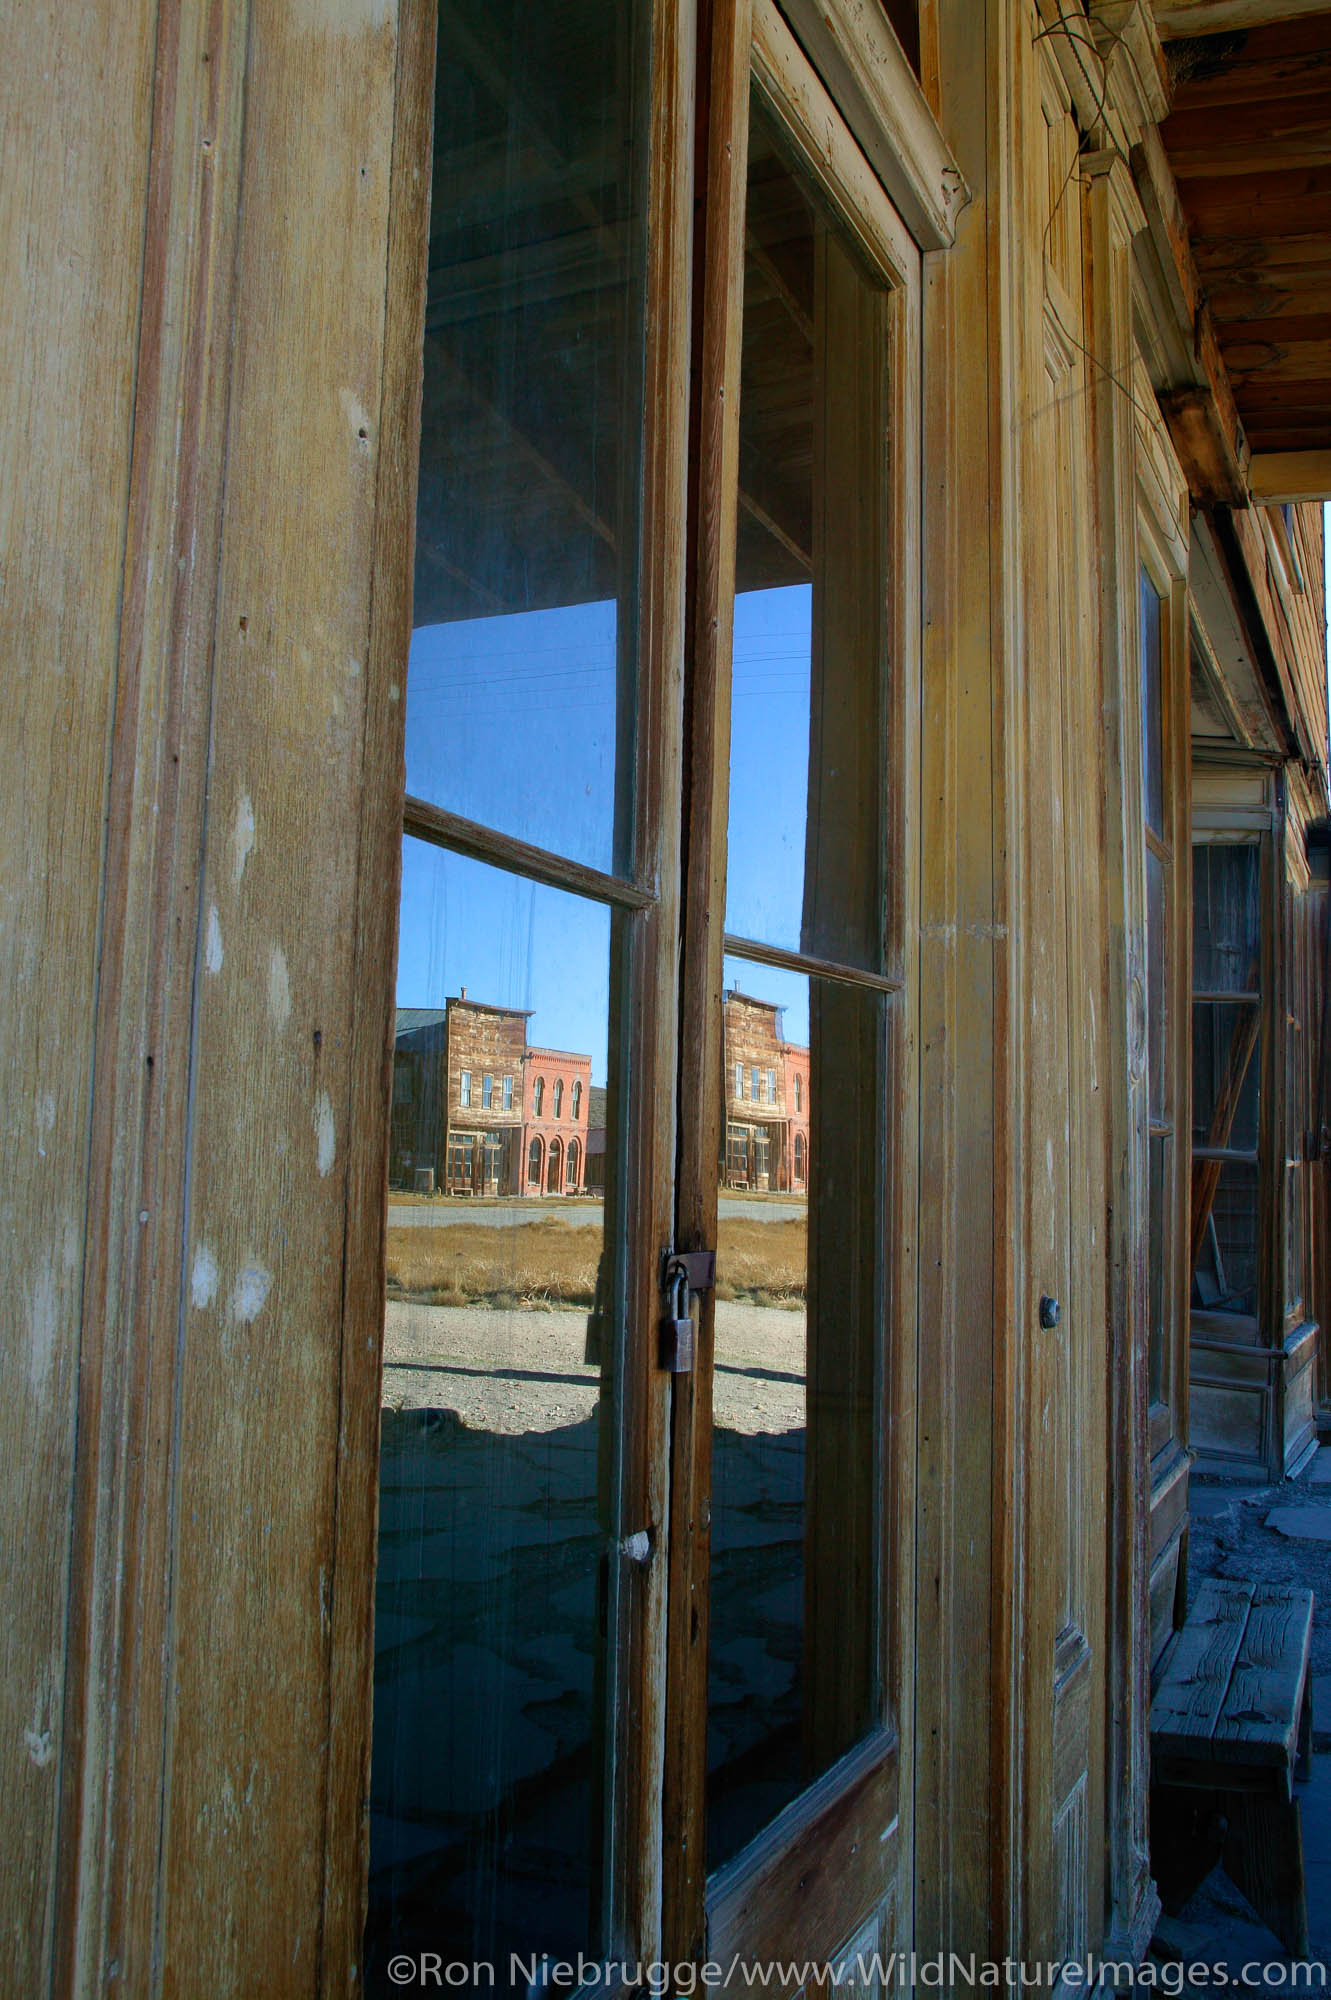 The Wheaton & Hollis Hotel in the historic ghost town of Bodie.  Bodie was once a bustling gold mining town, Bodie State Historic...